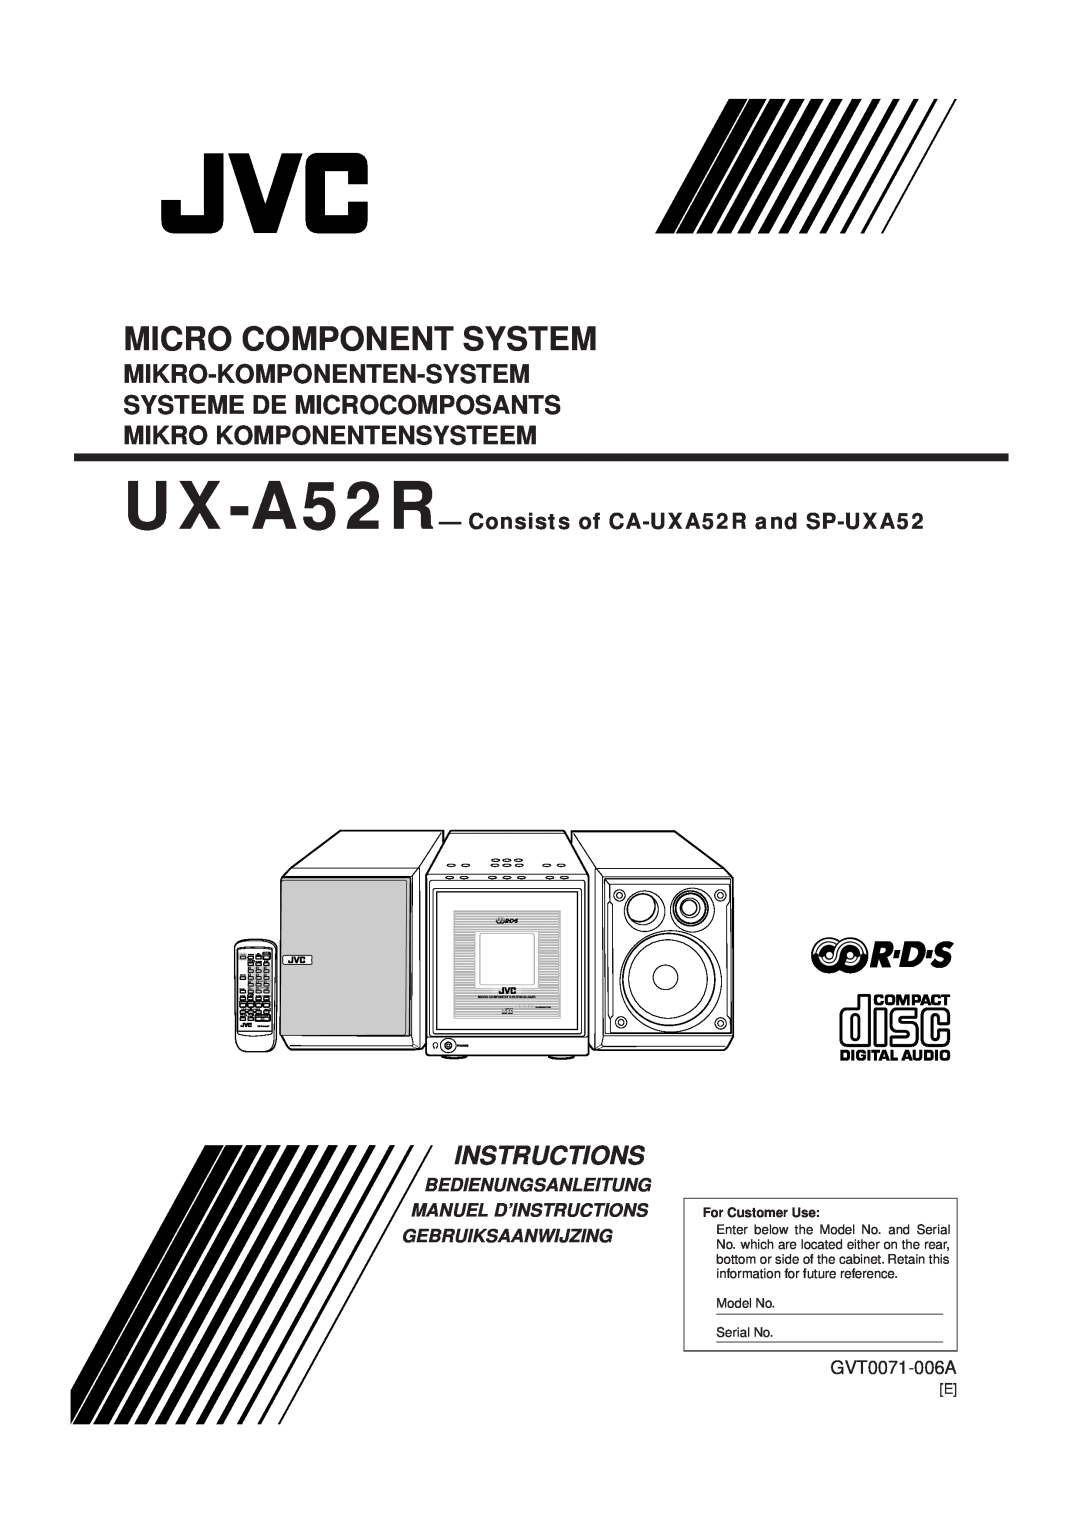 JVC manual UX-A52R - Consists of CA-UXA52Rand SP-UXA52, GVT0071-008A, Micro Component System, Instructions, Standby/On 